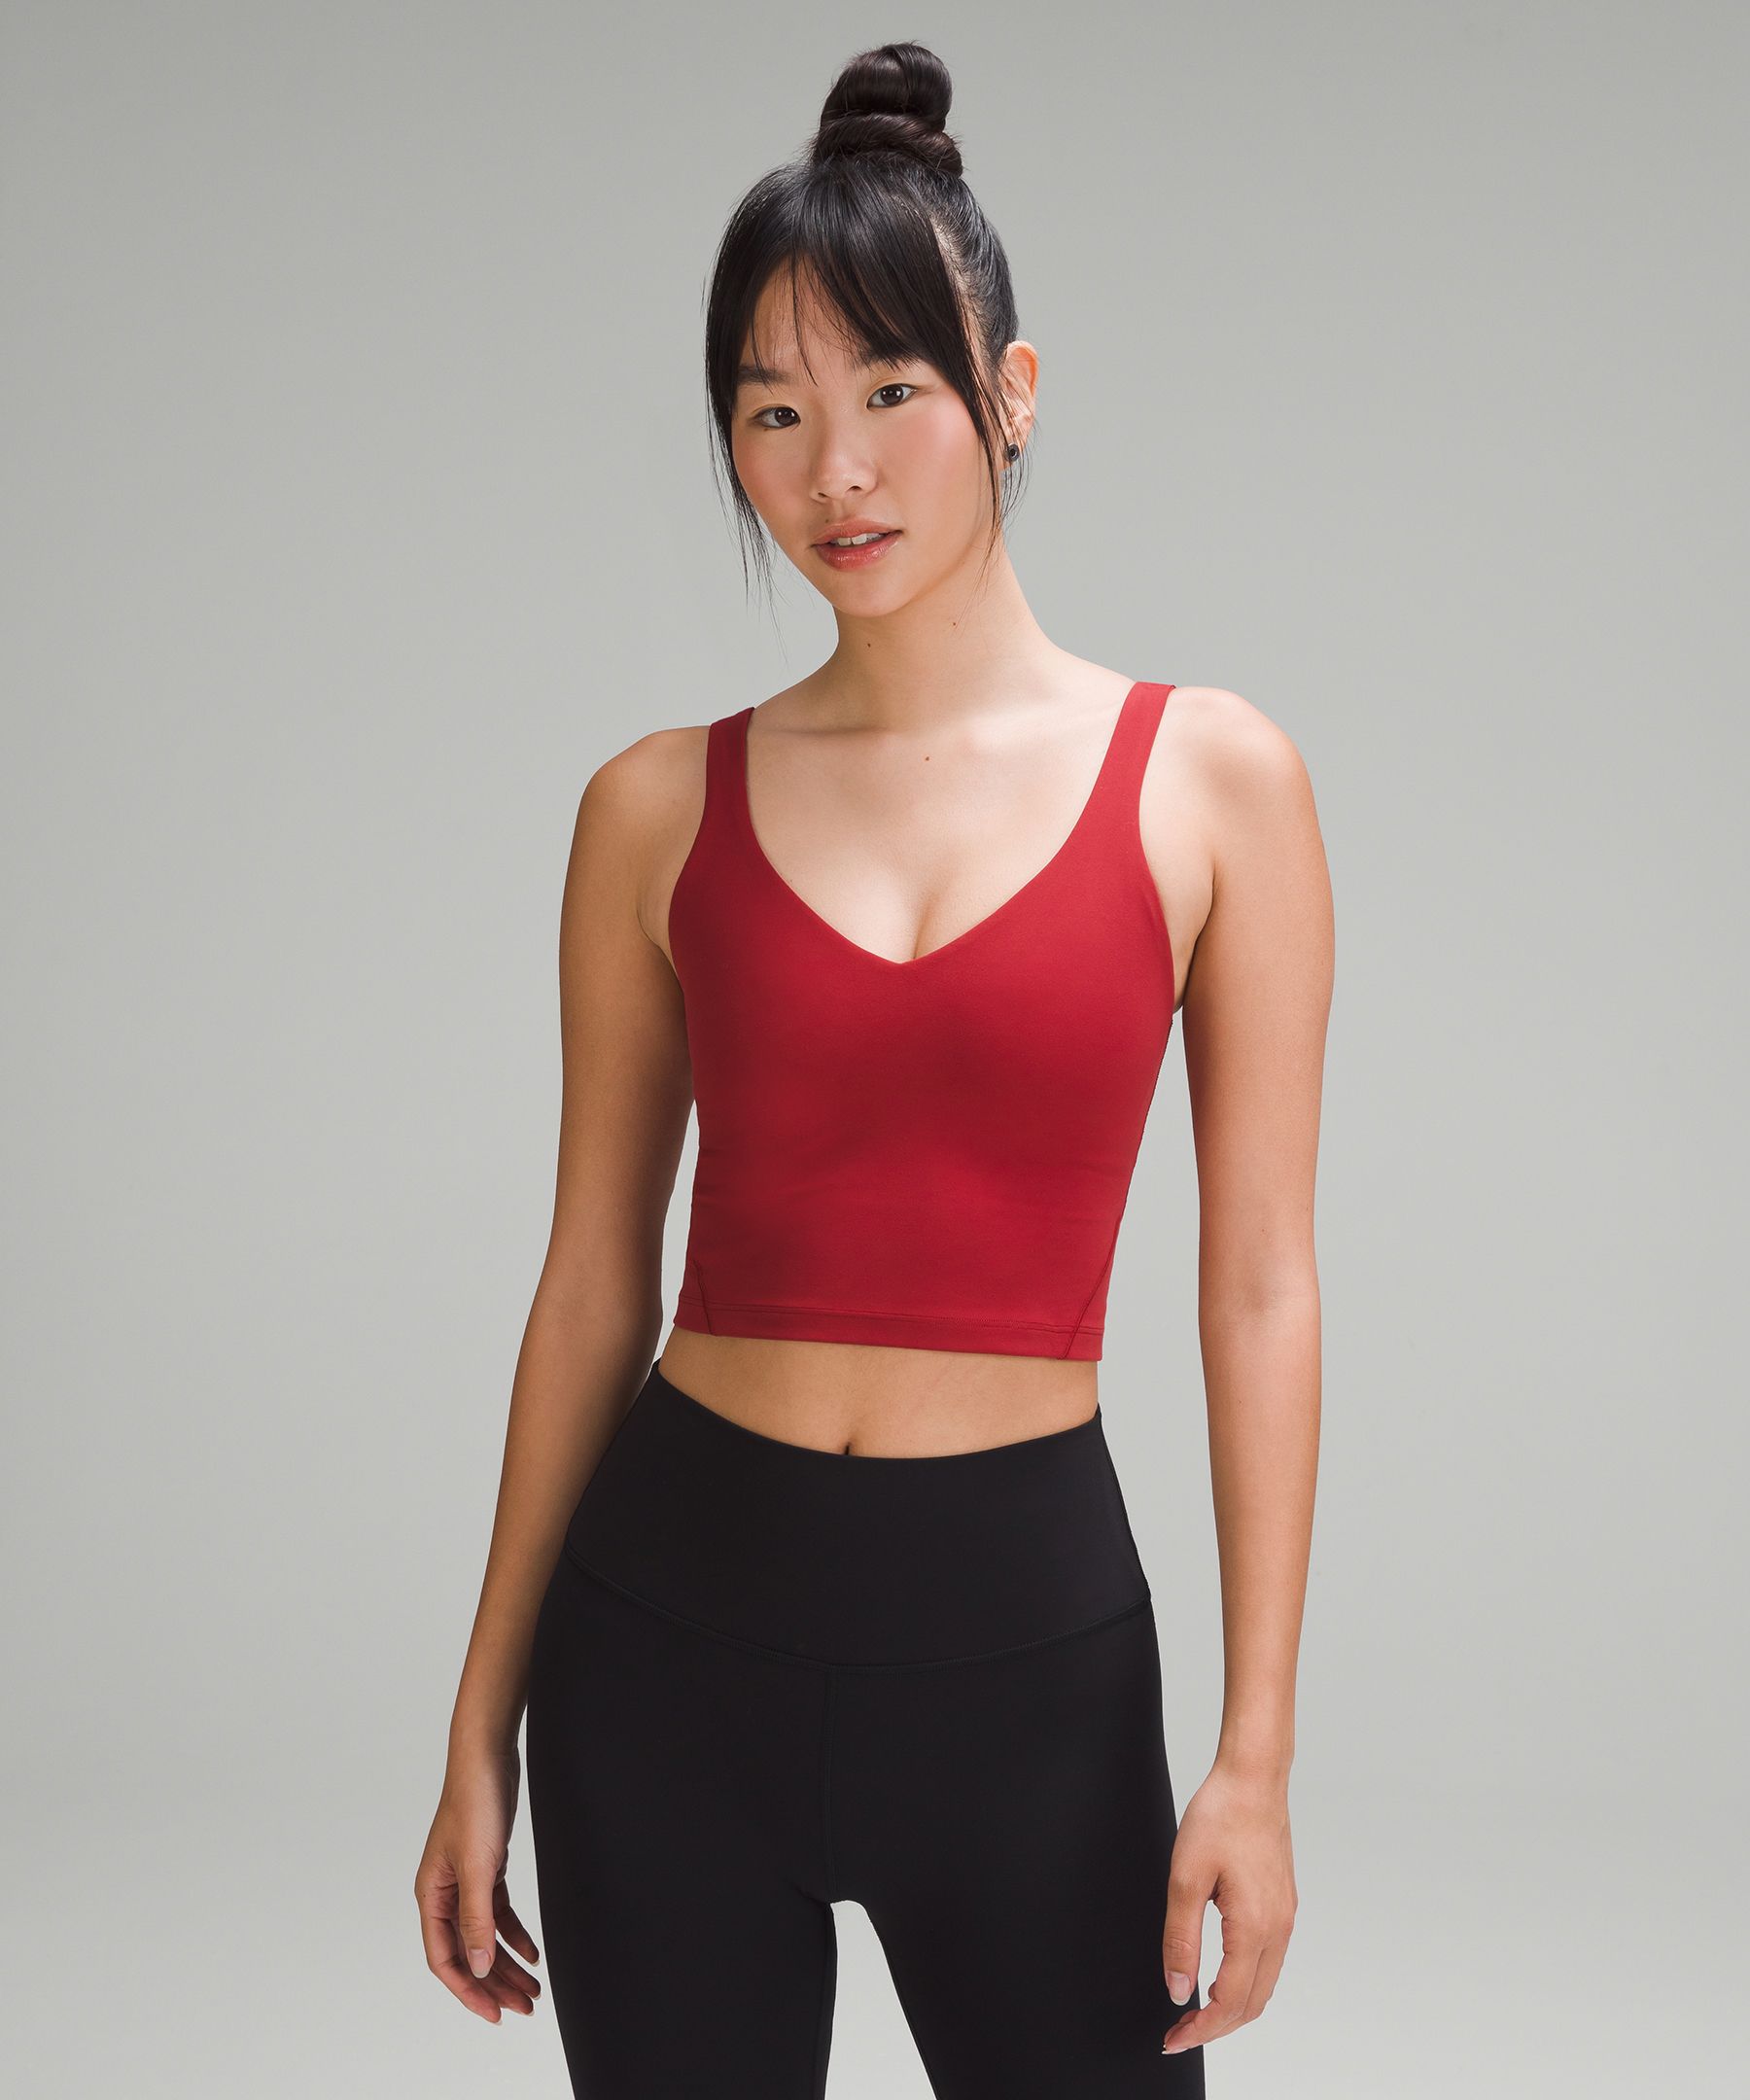 Lululemon Align Tank size 8 Soft cranberry was never released in the US